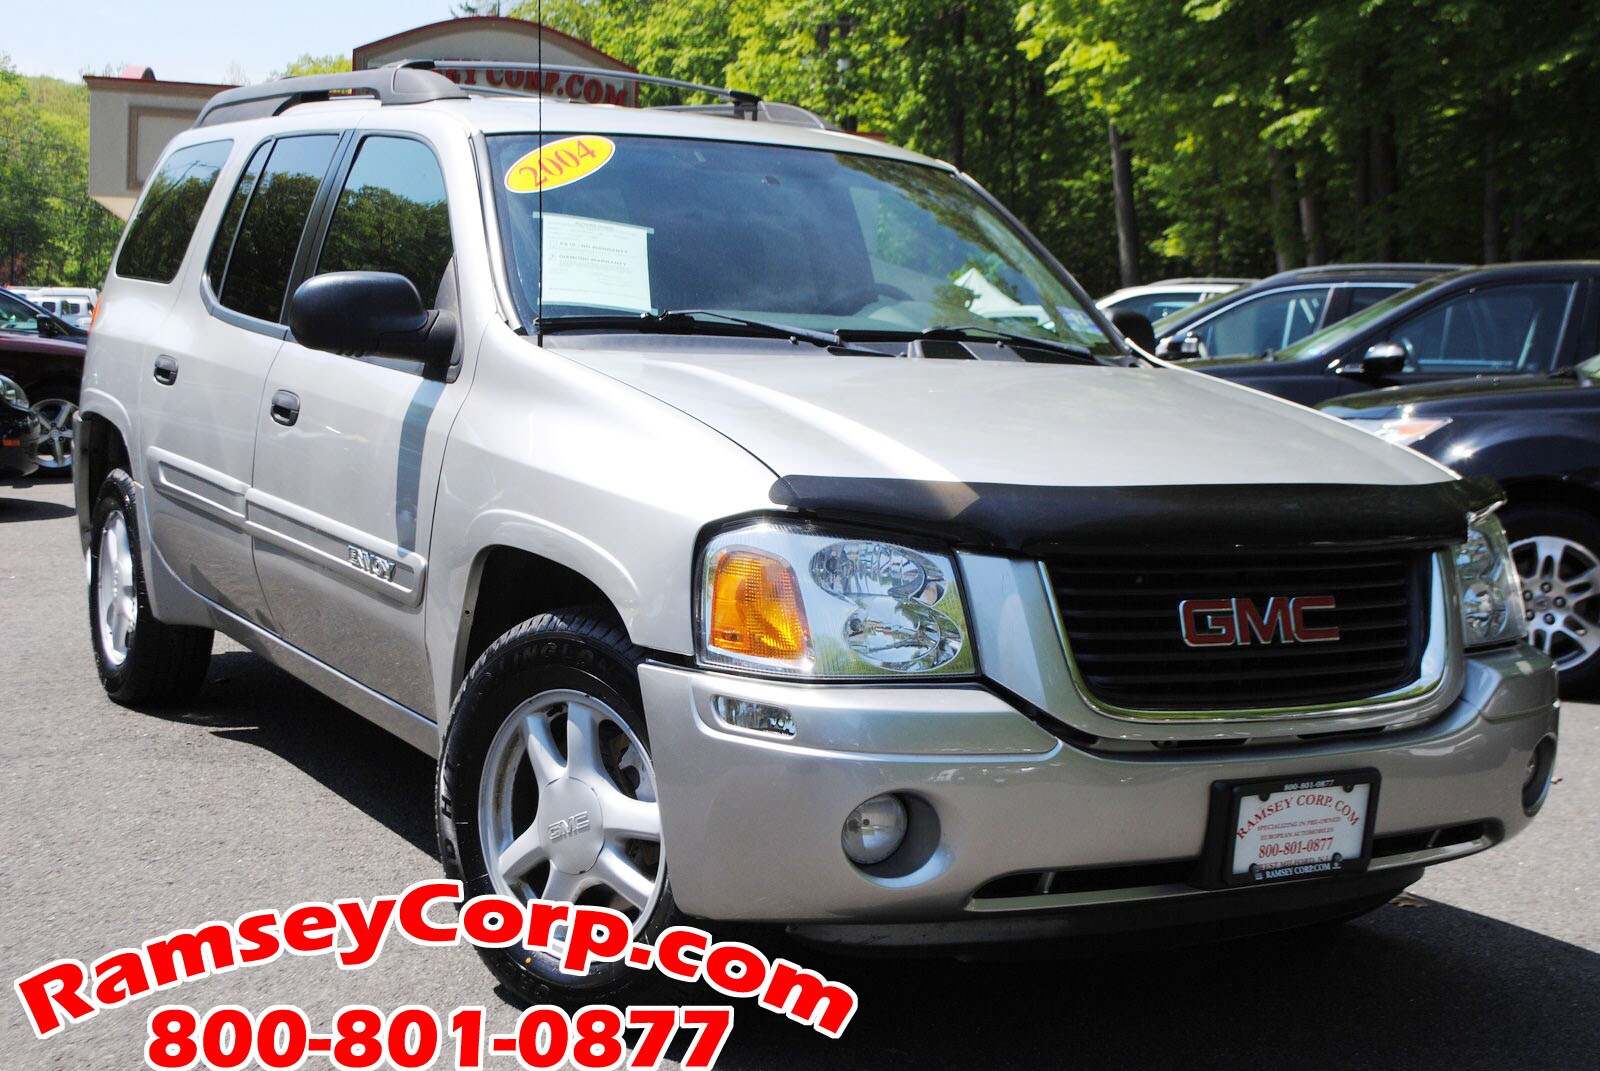 Used 2004 GMC Envoy XL For Sale at Ramsey Corp. | VIN: 1GKET16S746214132